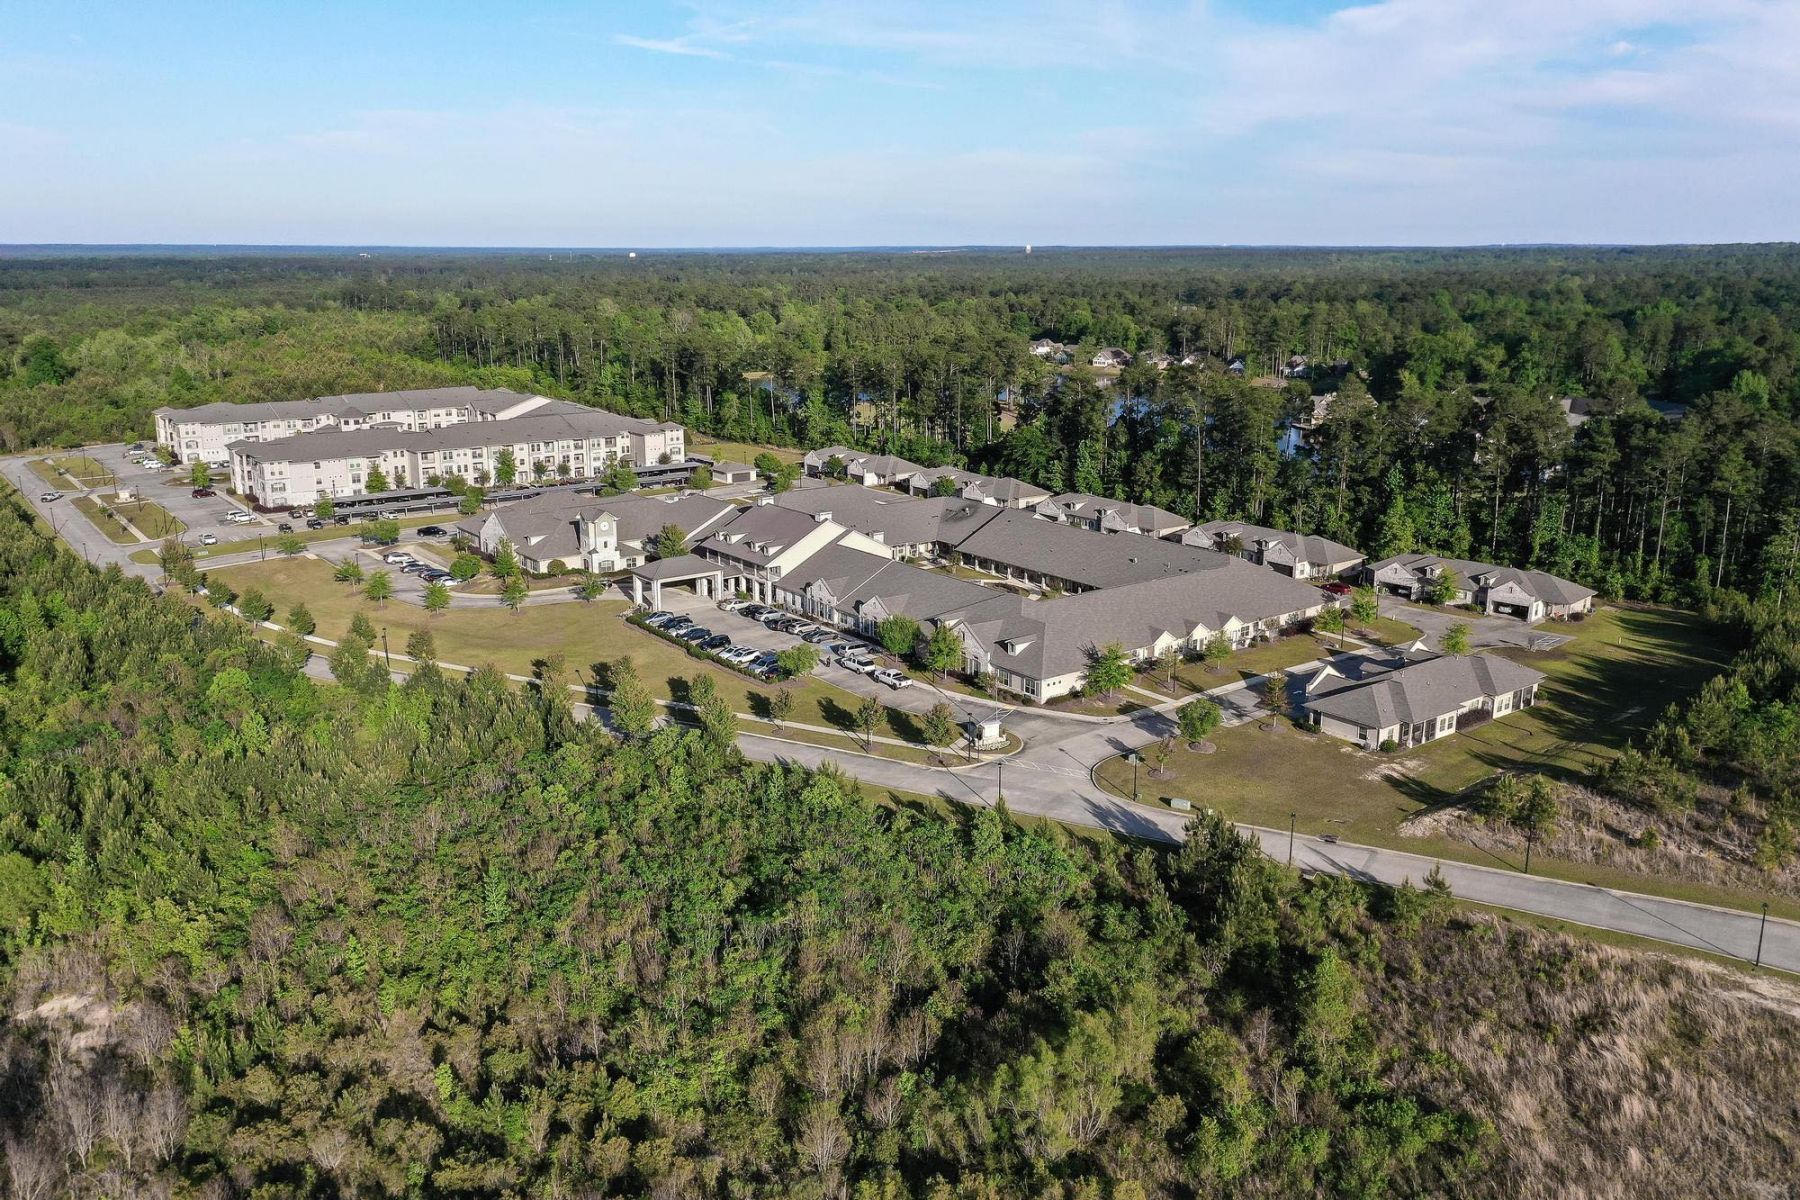 The Claiborne at Hattiesburg aerial view of community and bus that provides transportation